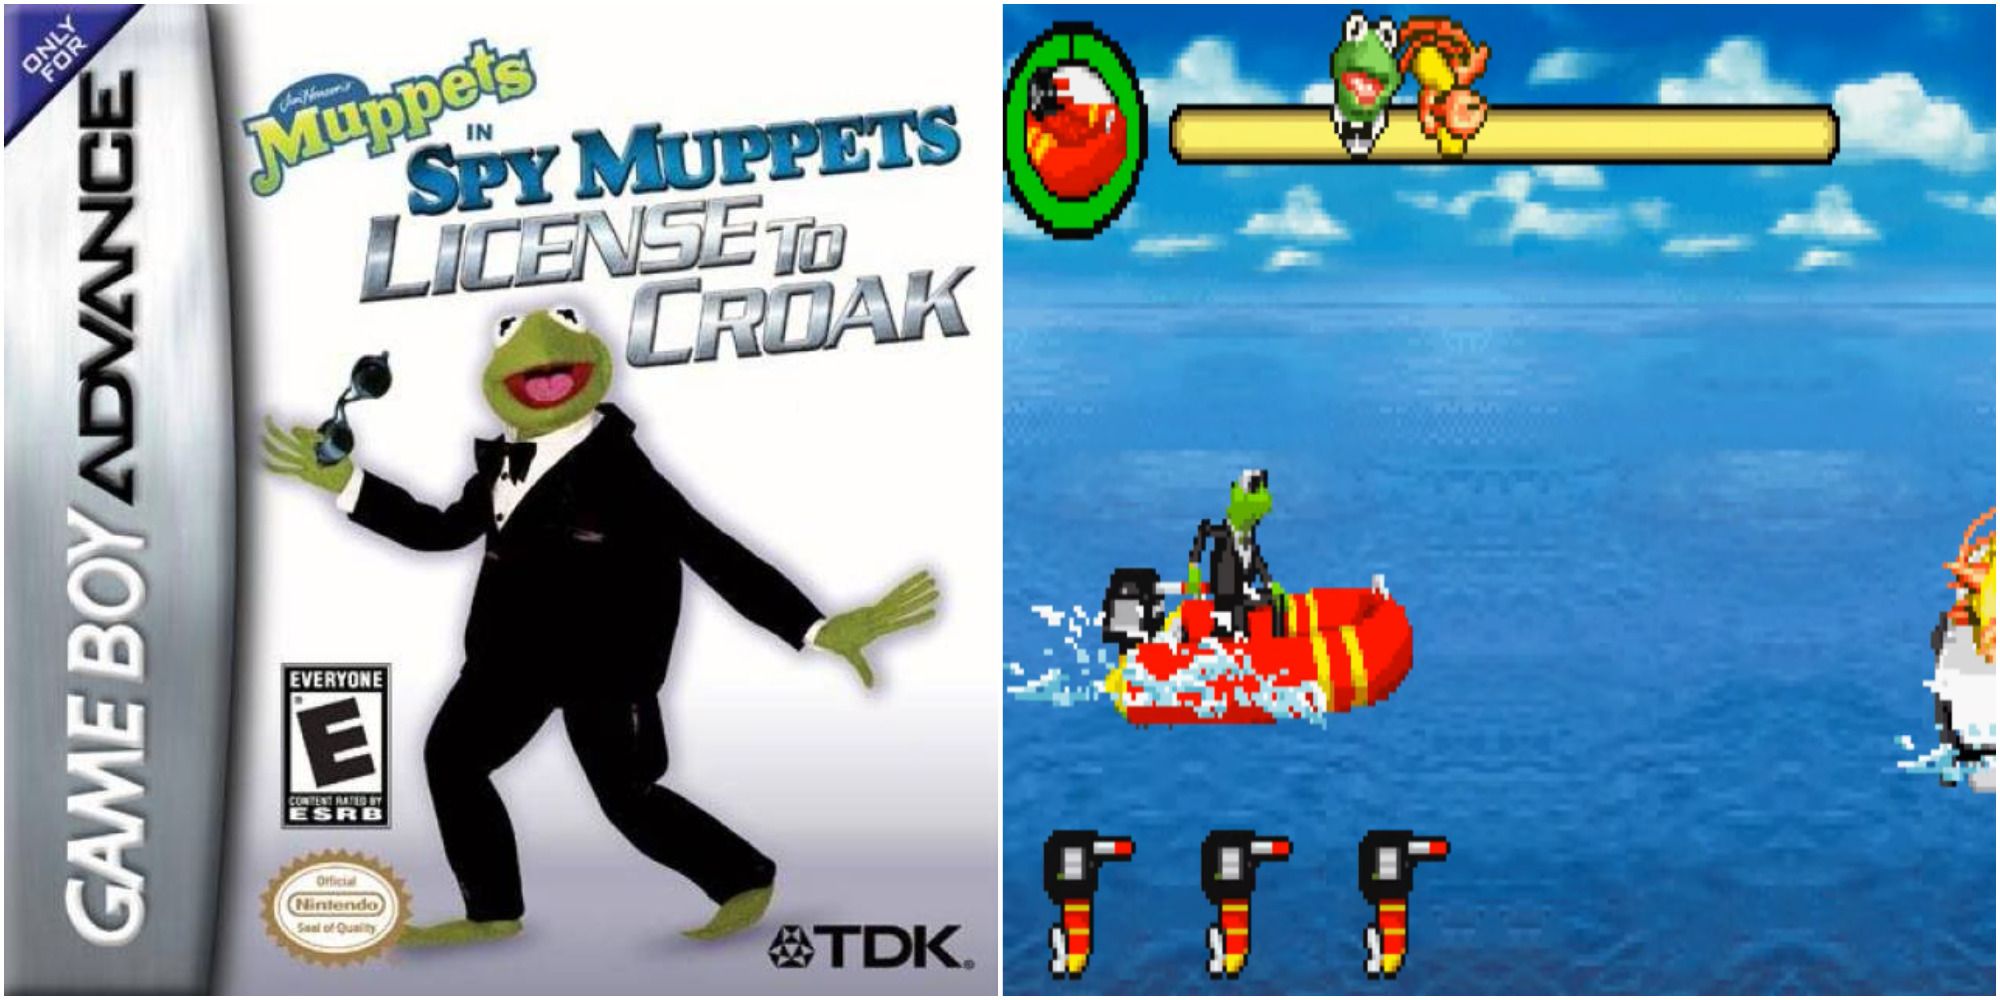 Split image The Muppets in Spy Muppets License To Croak for Game Boy Advance starring Agent Kermit and vehicle chase gameplay